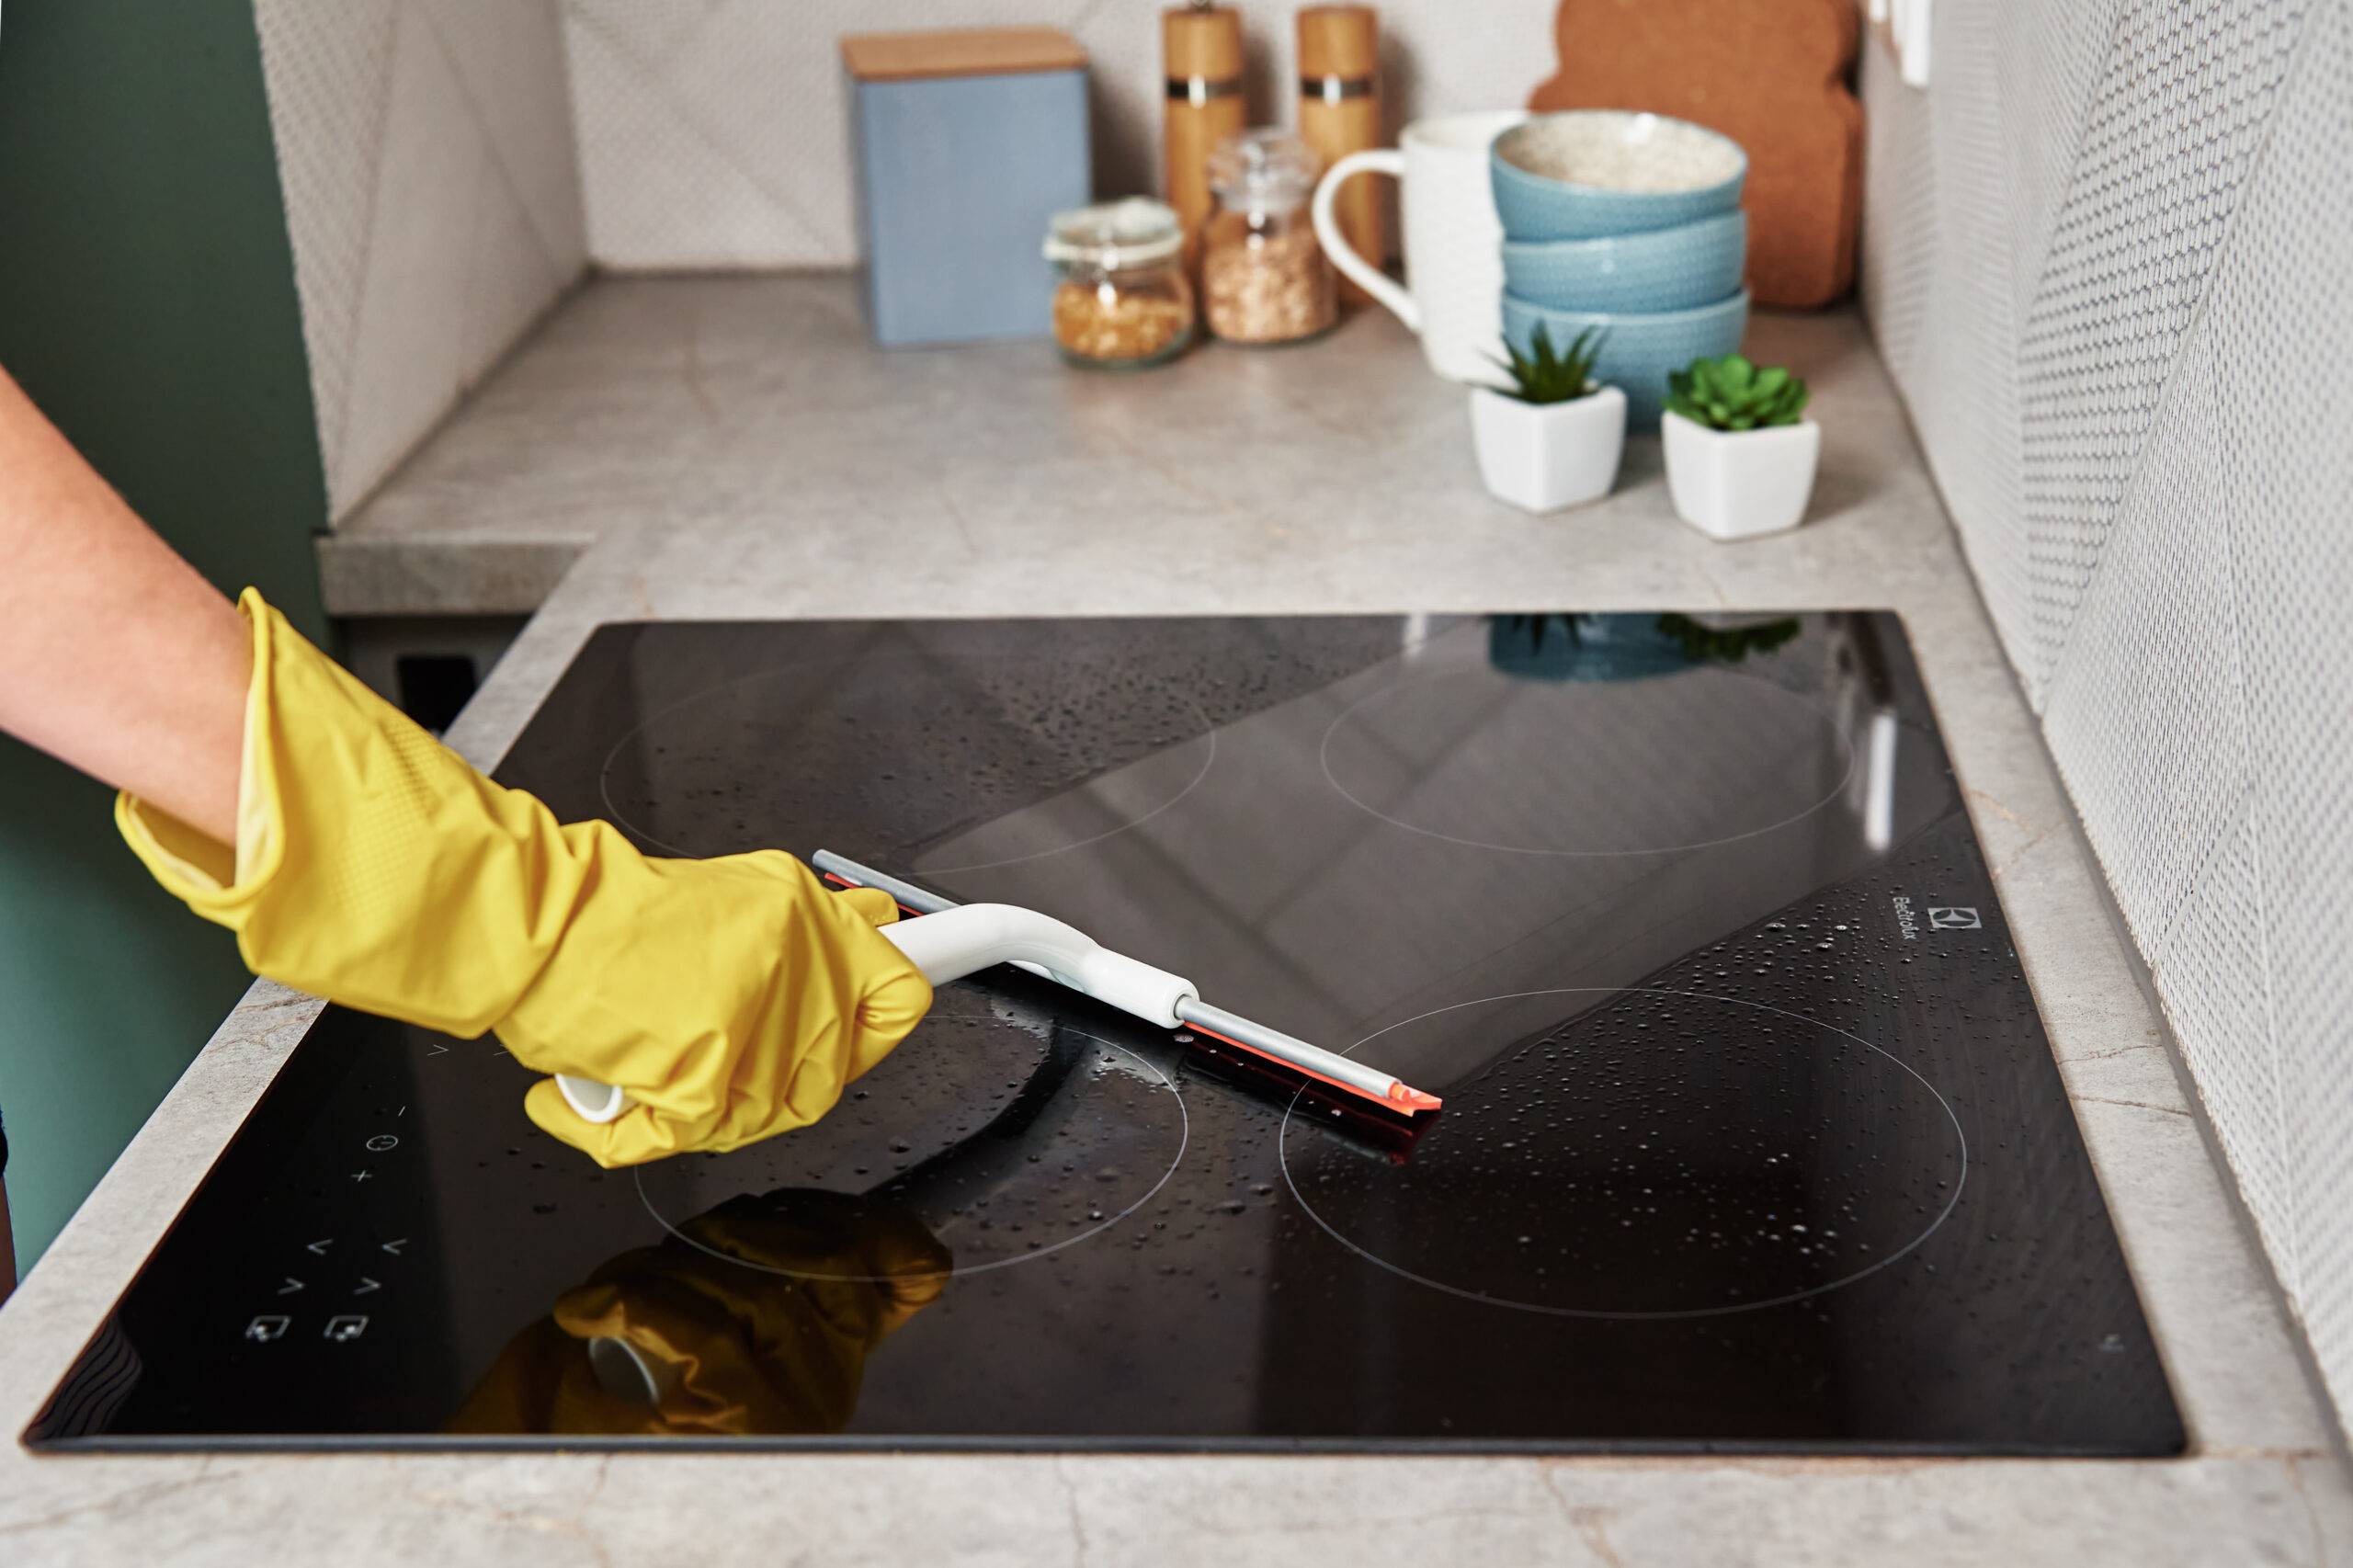 Cleaning induction stove. Woman in yellow rubber gloves cleans kitchen induction hob with cleaning spray.